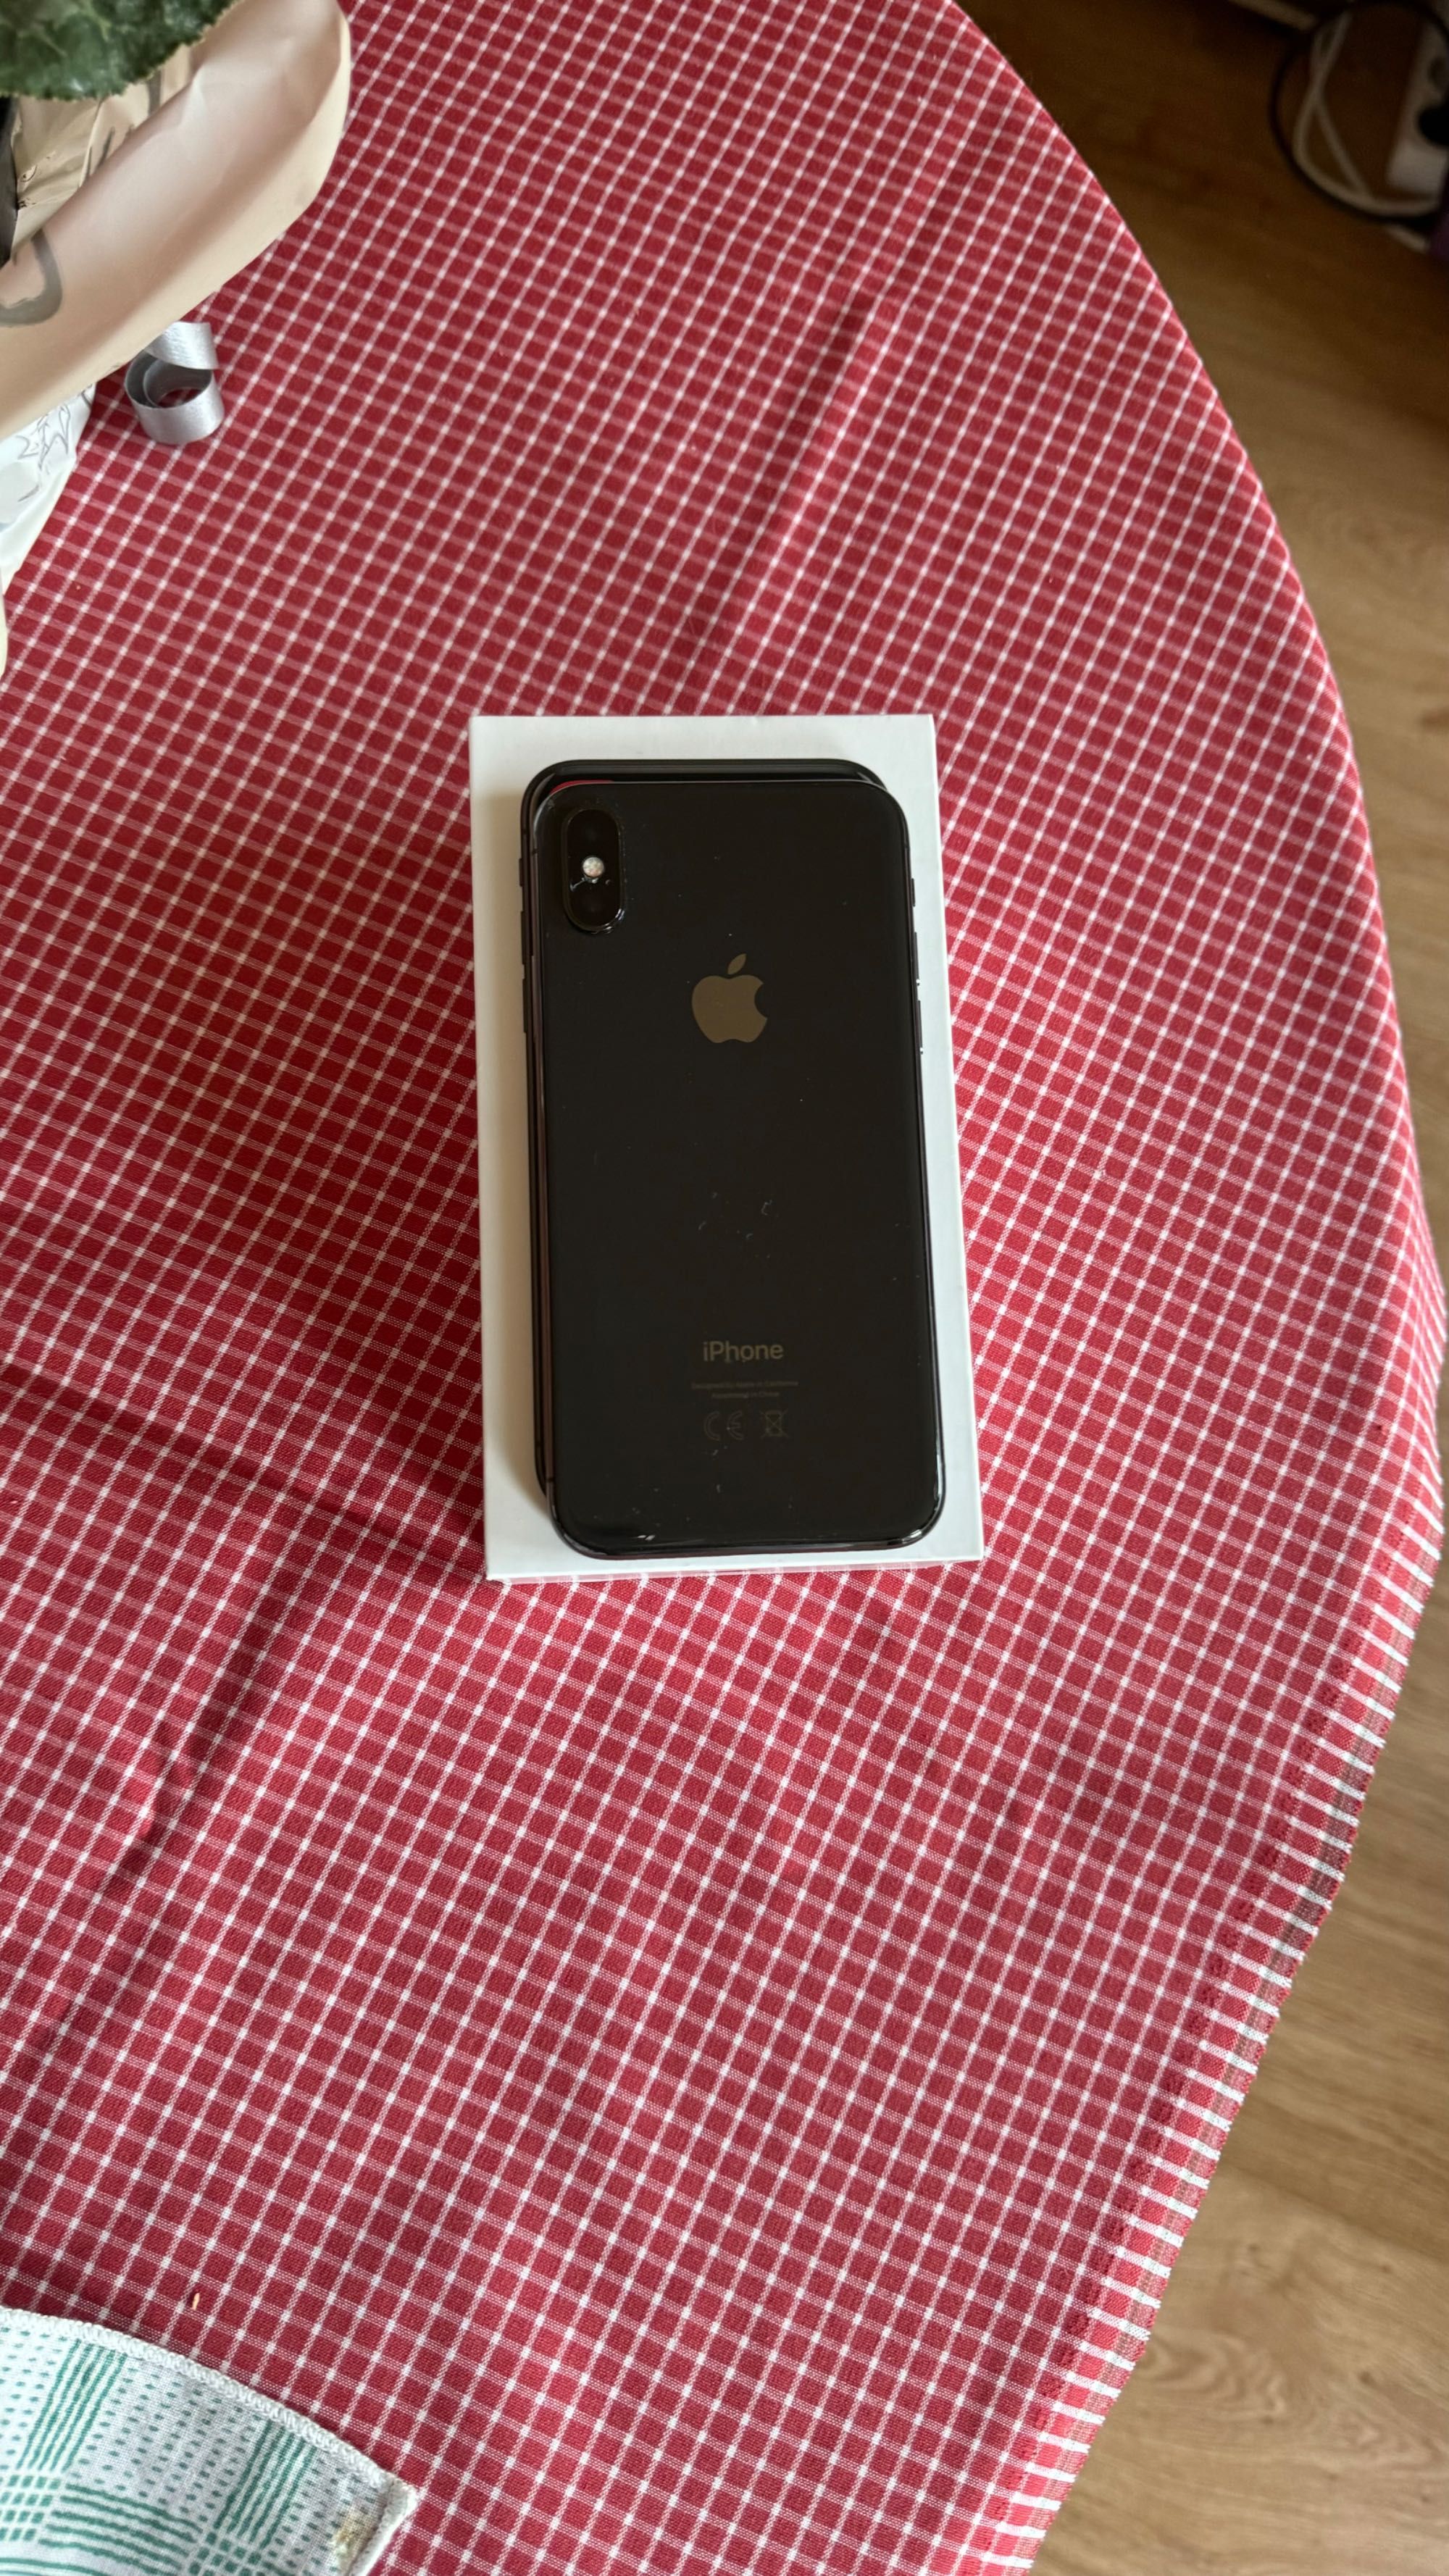 Iphone X space gray 64GB